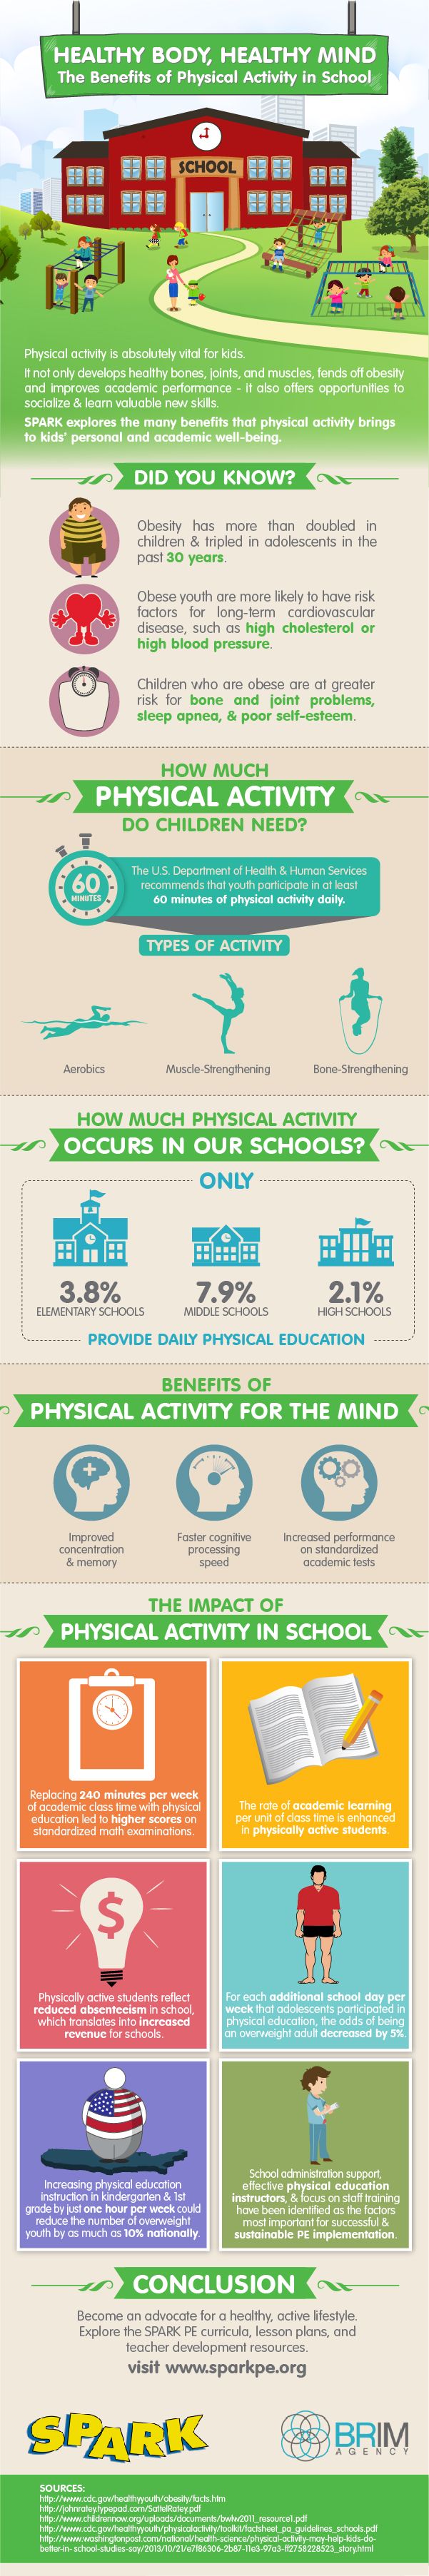 Infographic Highlights Benefits of Physical Activity in Schools